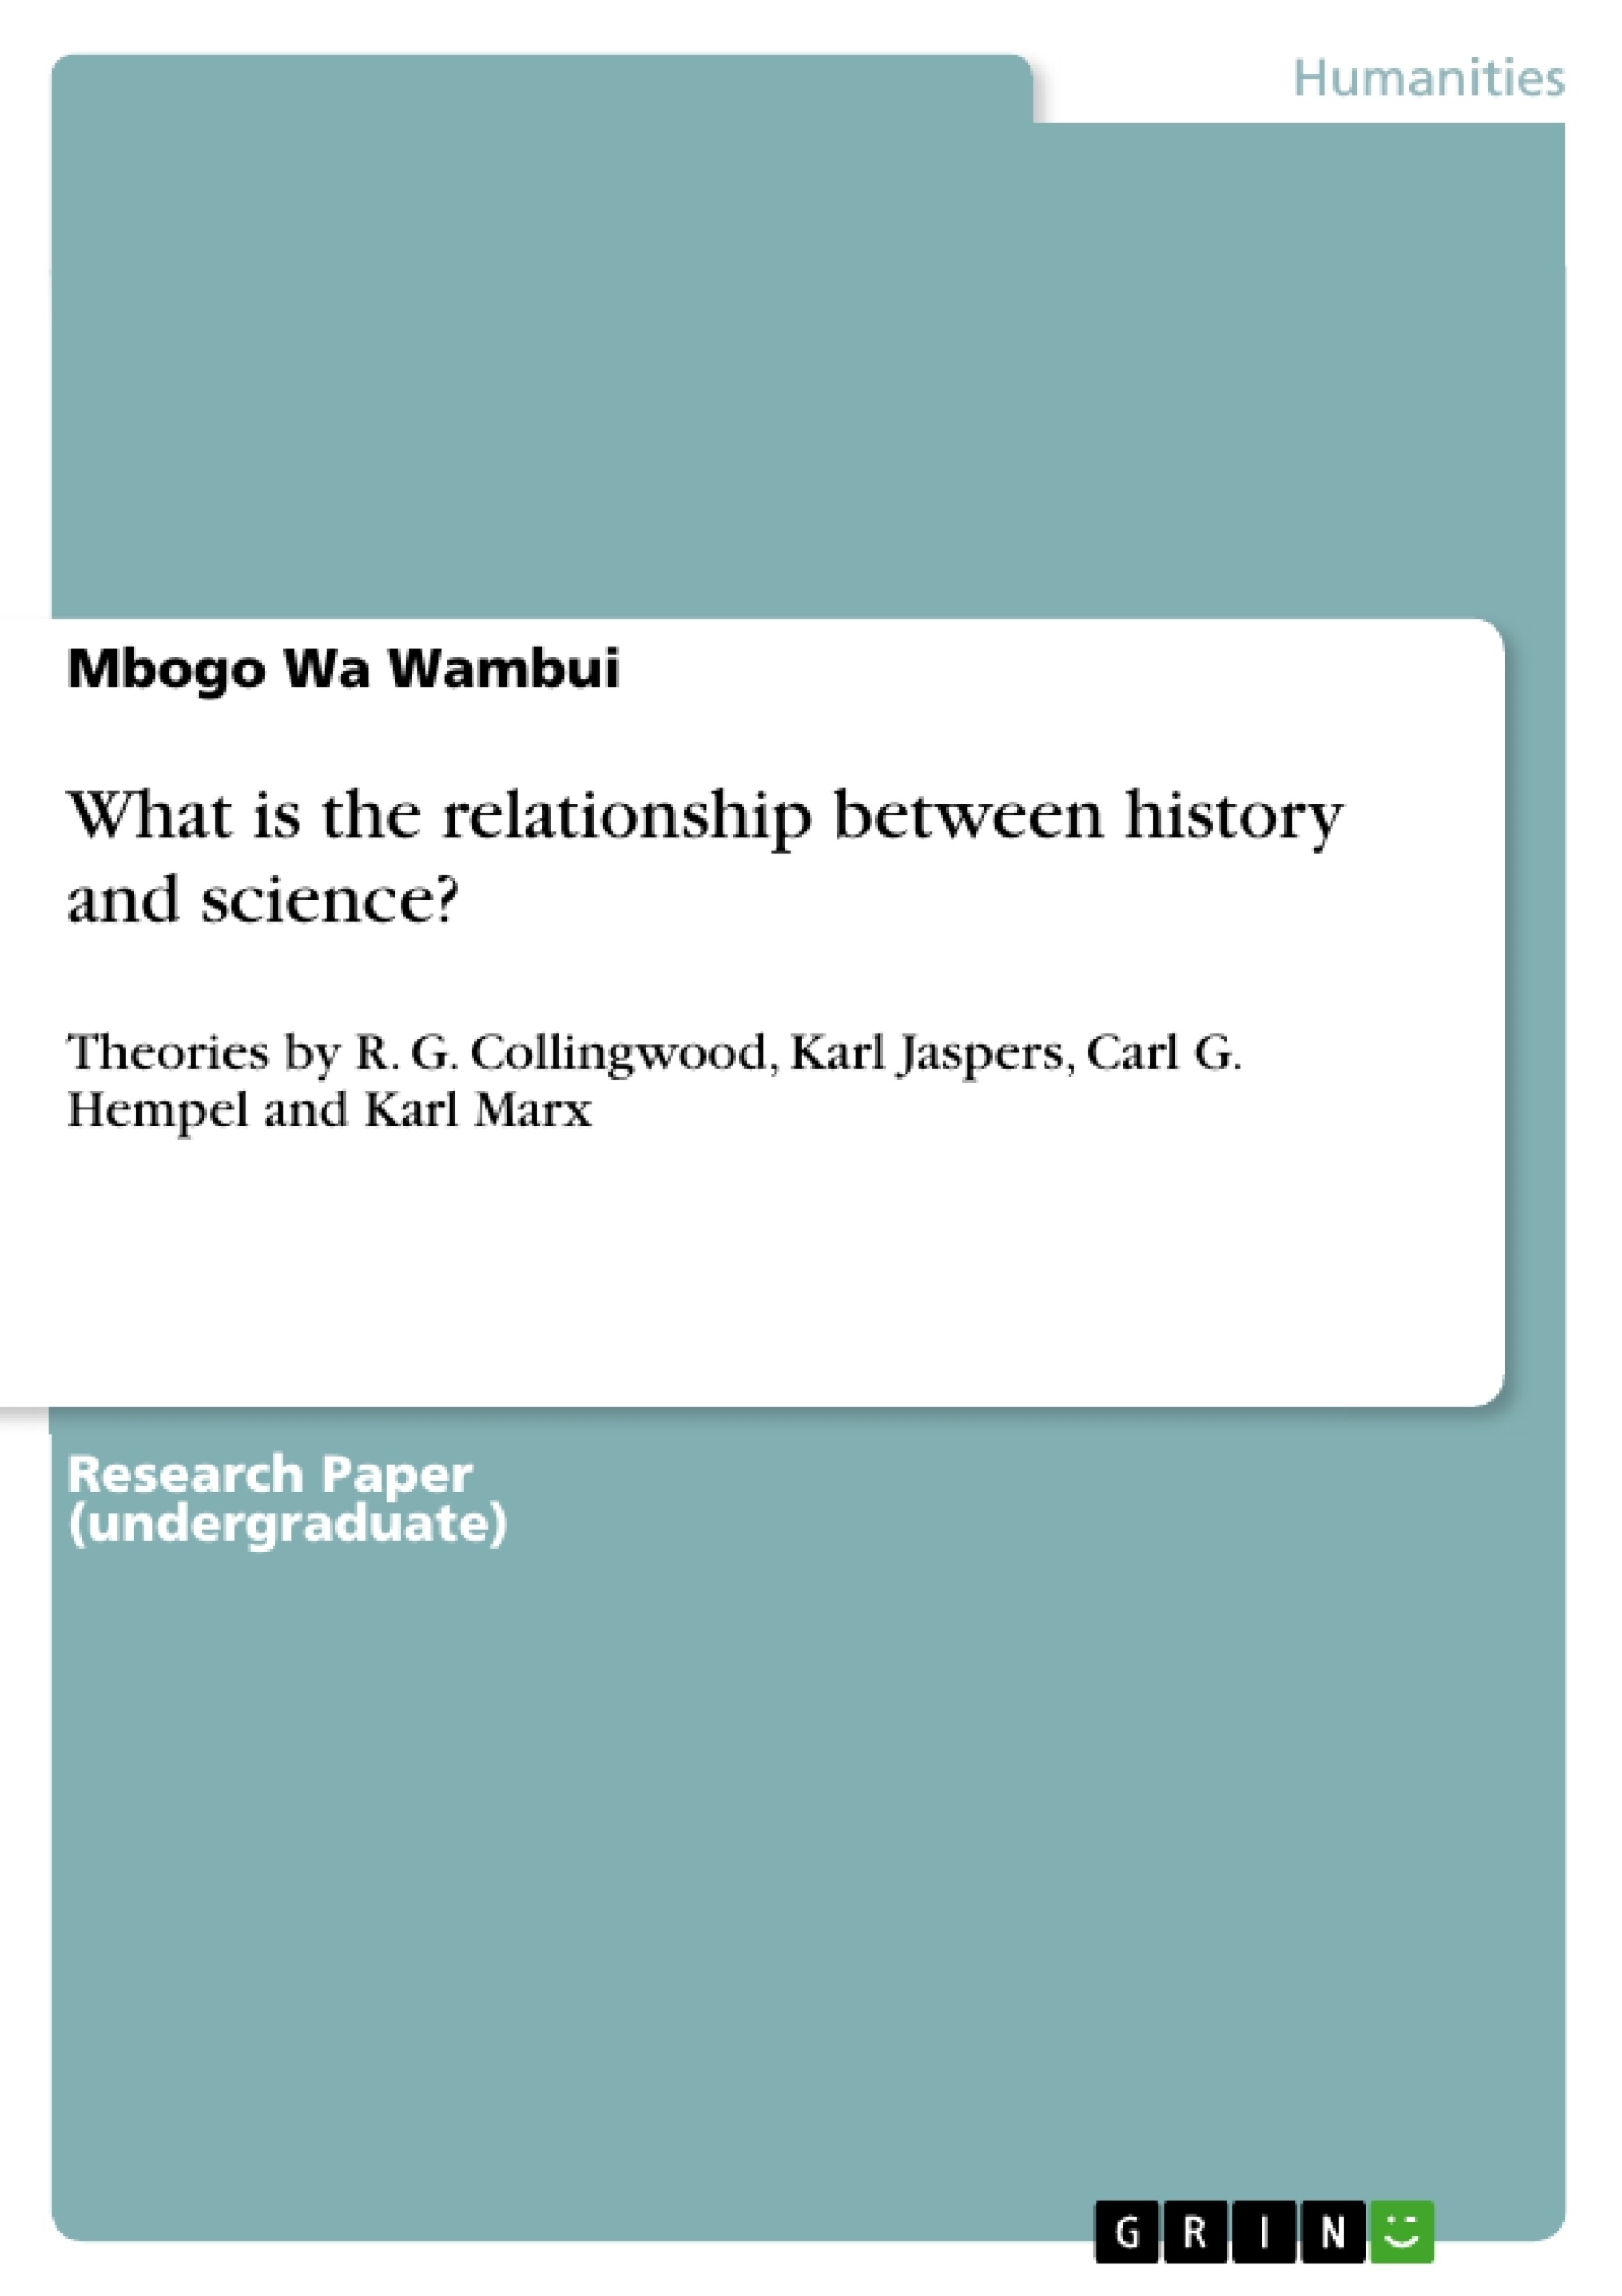 Title: What is the relationship between history and science?